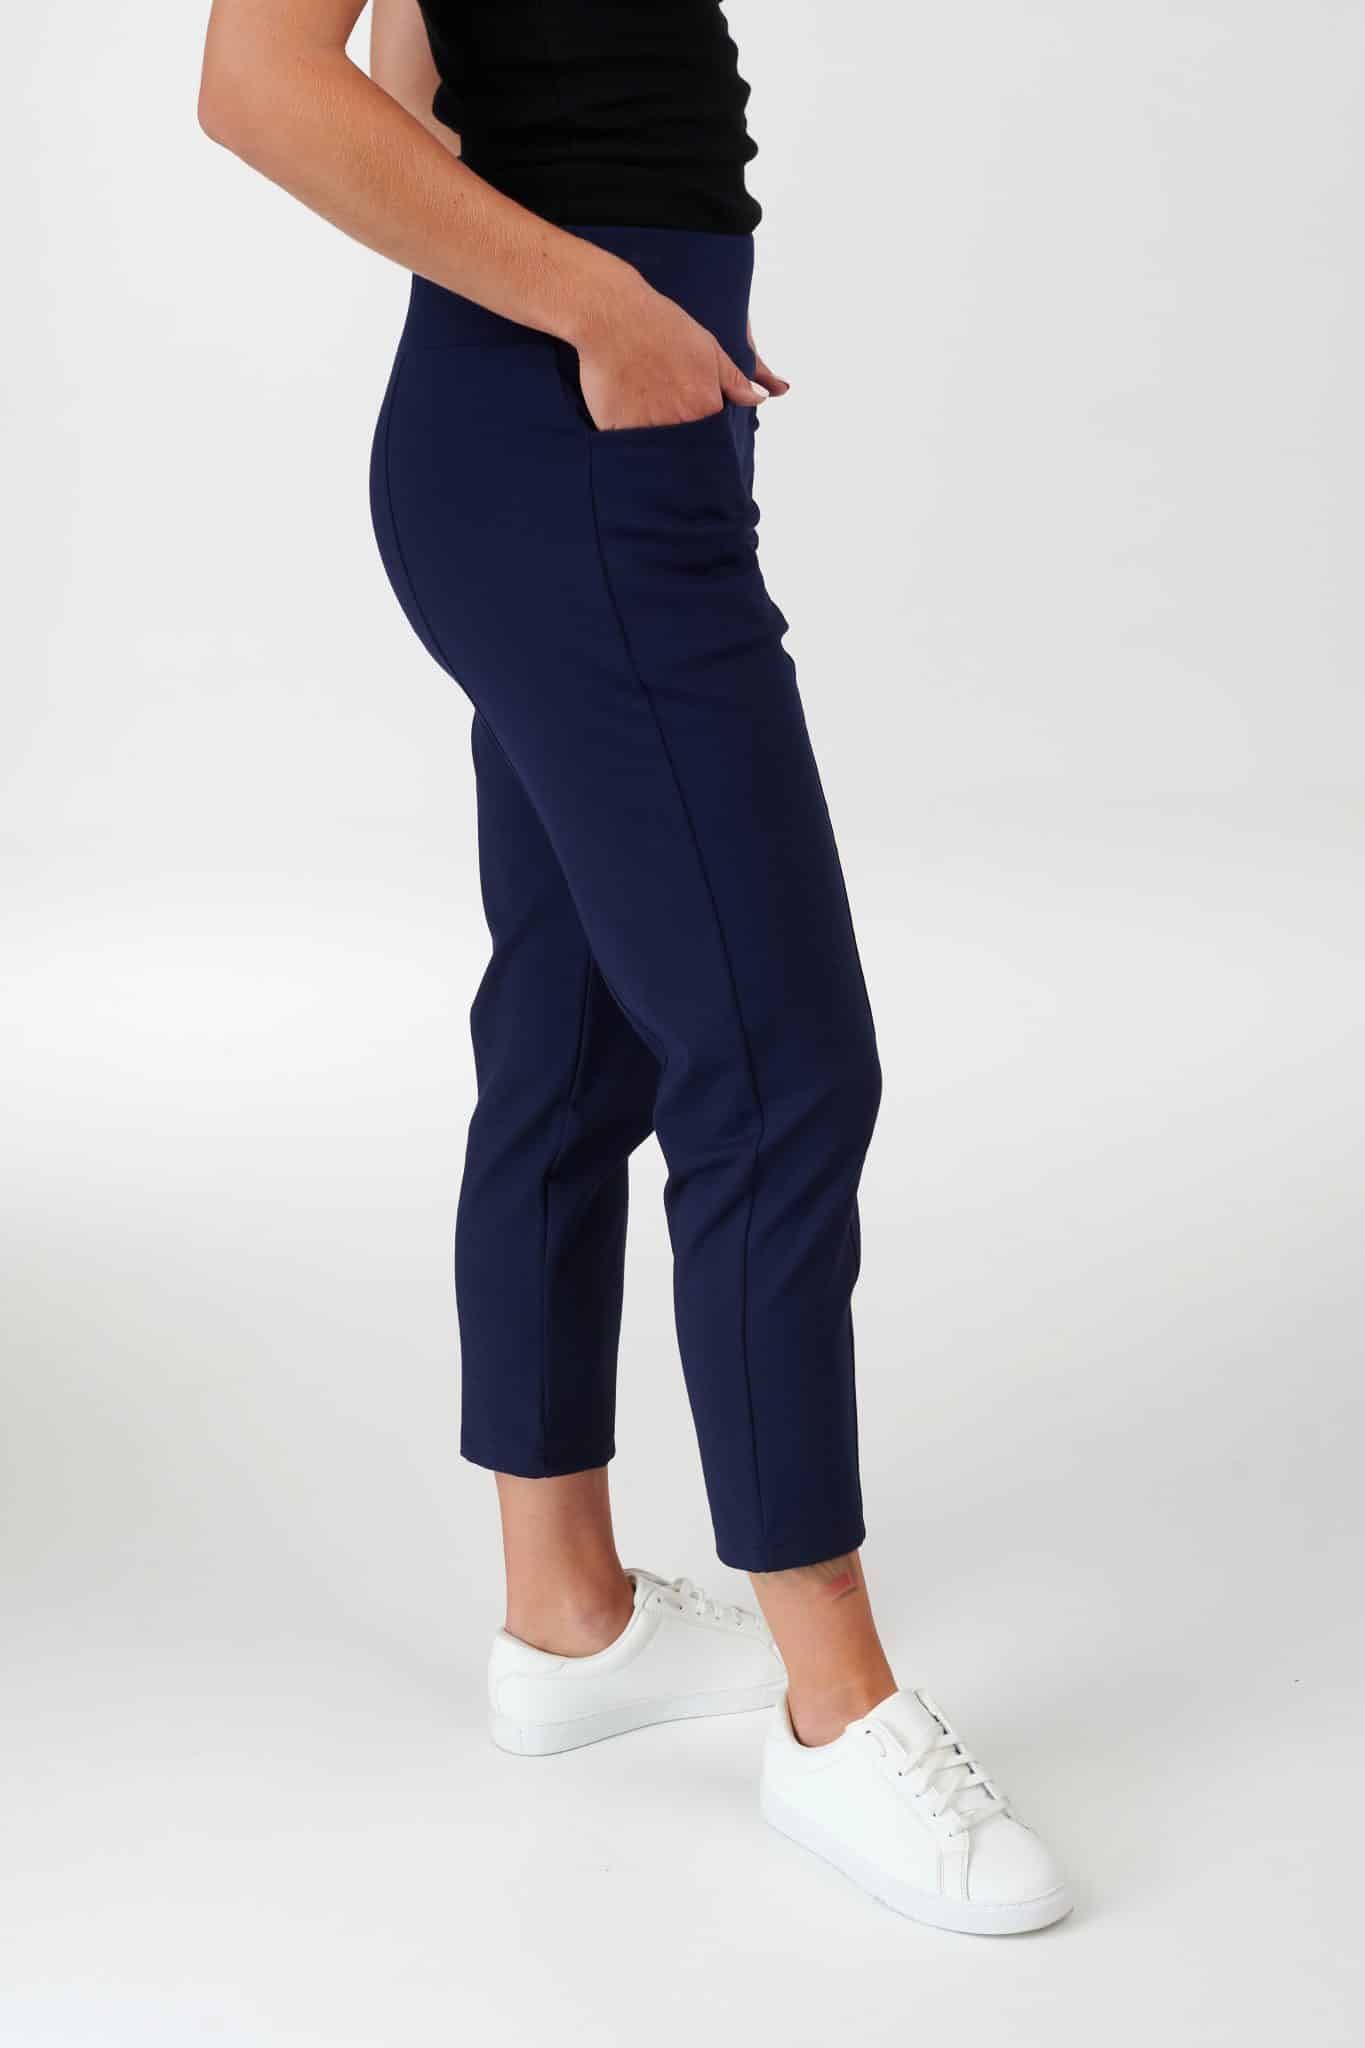 Wowsers Trousers in Navy - UMU